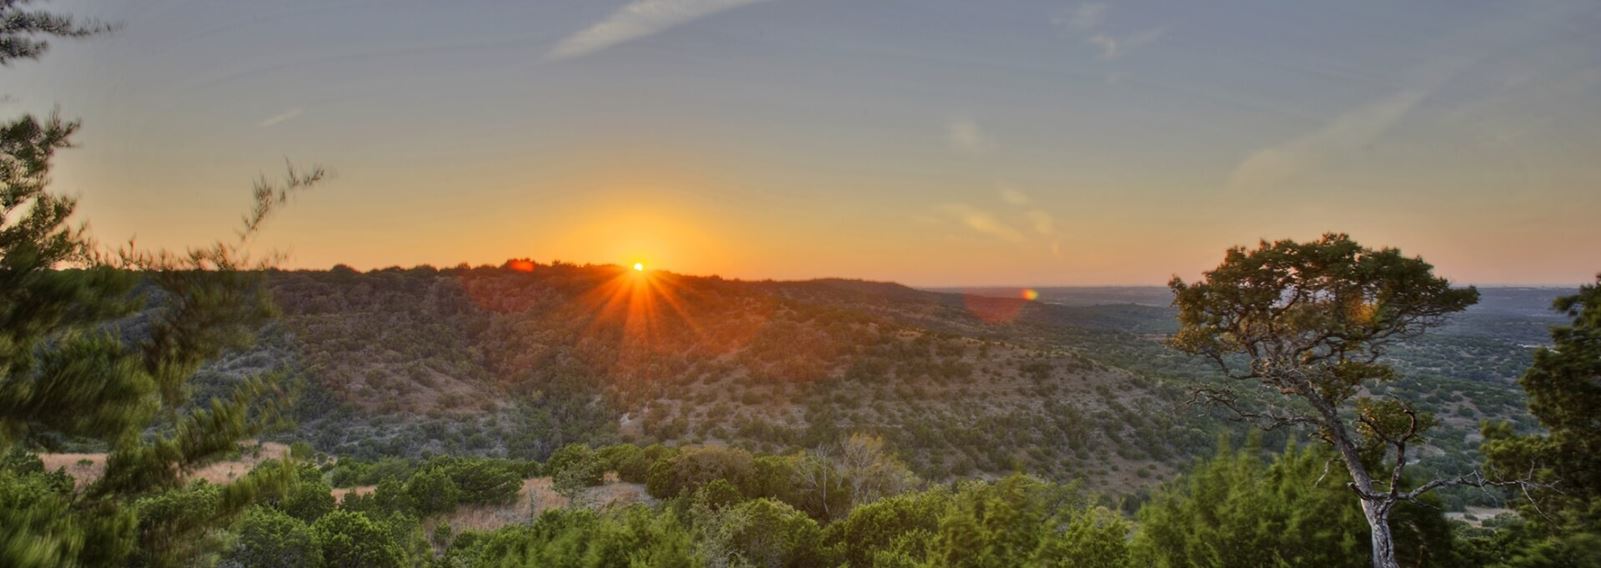 hillcountry-sunset-sweetwater.jpg